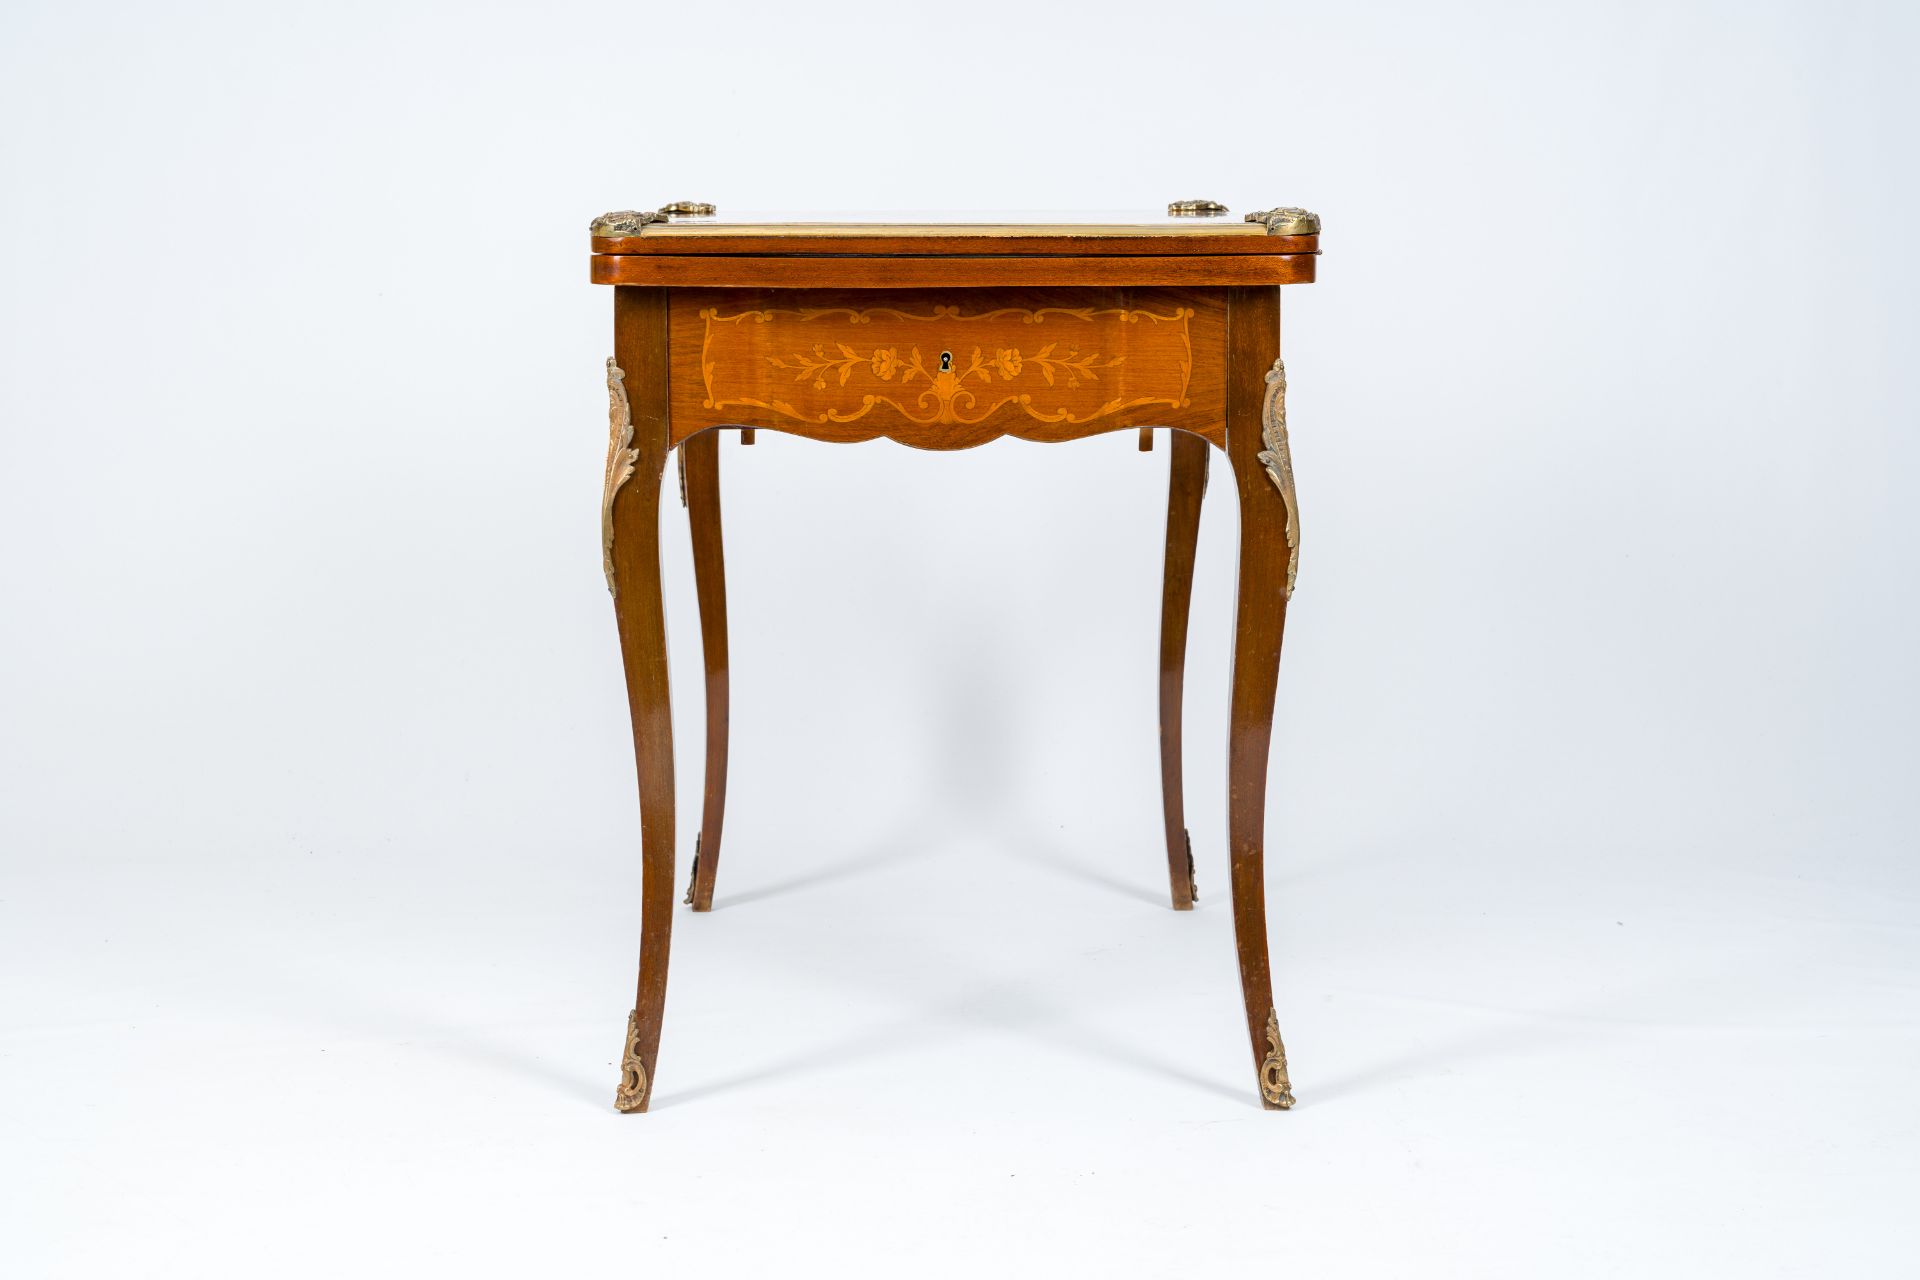 A French bronze mounted wood game table with marquetry top, 19th/20th C. - Image 6 of 10